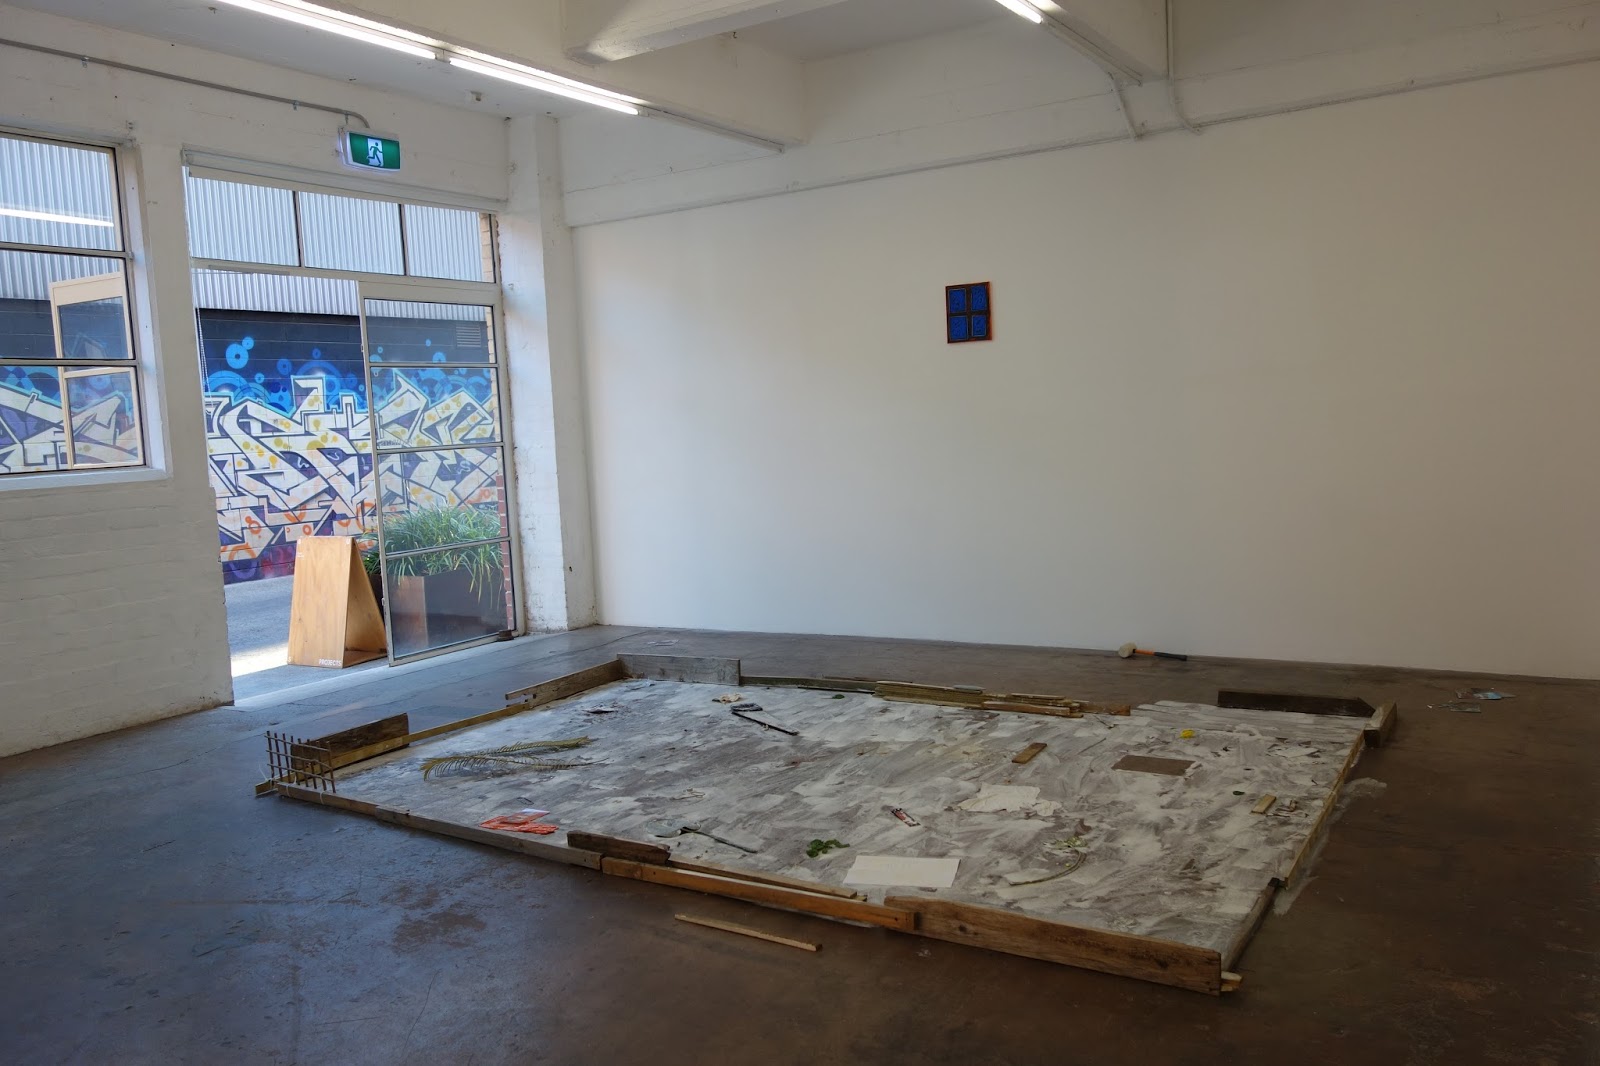  Lemon tree hanging over the perimetre, 2015 collaborative floor painting with Christopher LG Hill  in  Glass Shoebox  at Bus Projects 